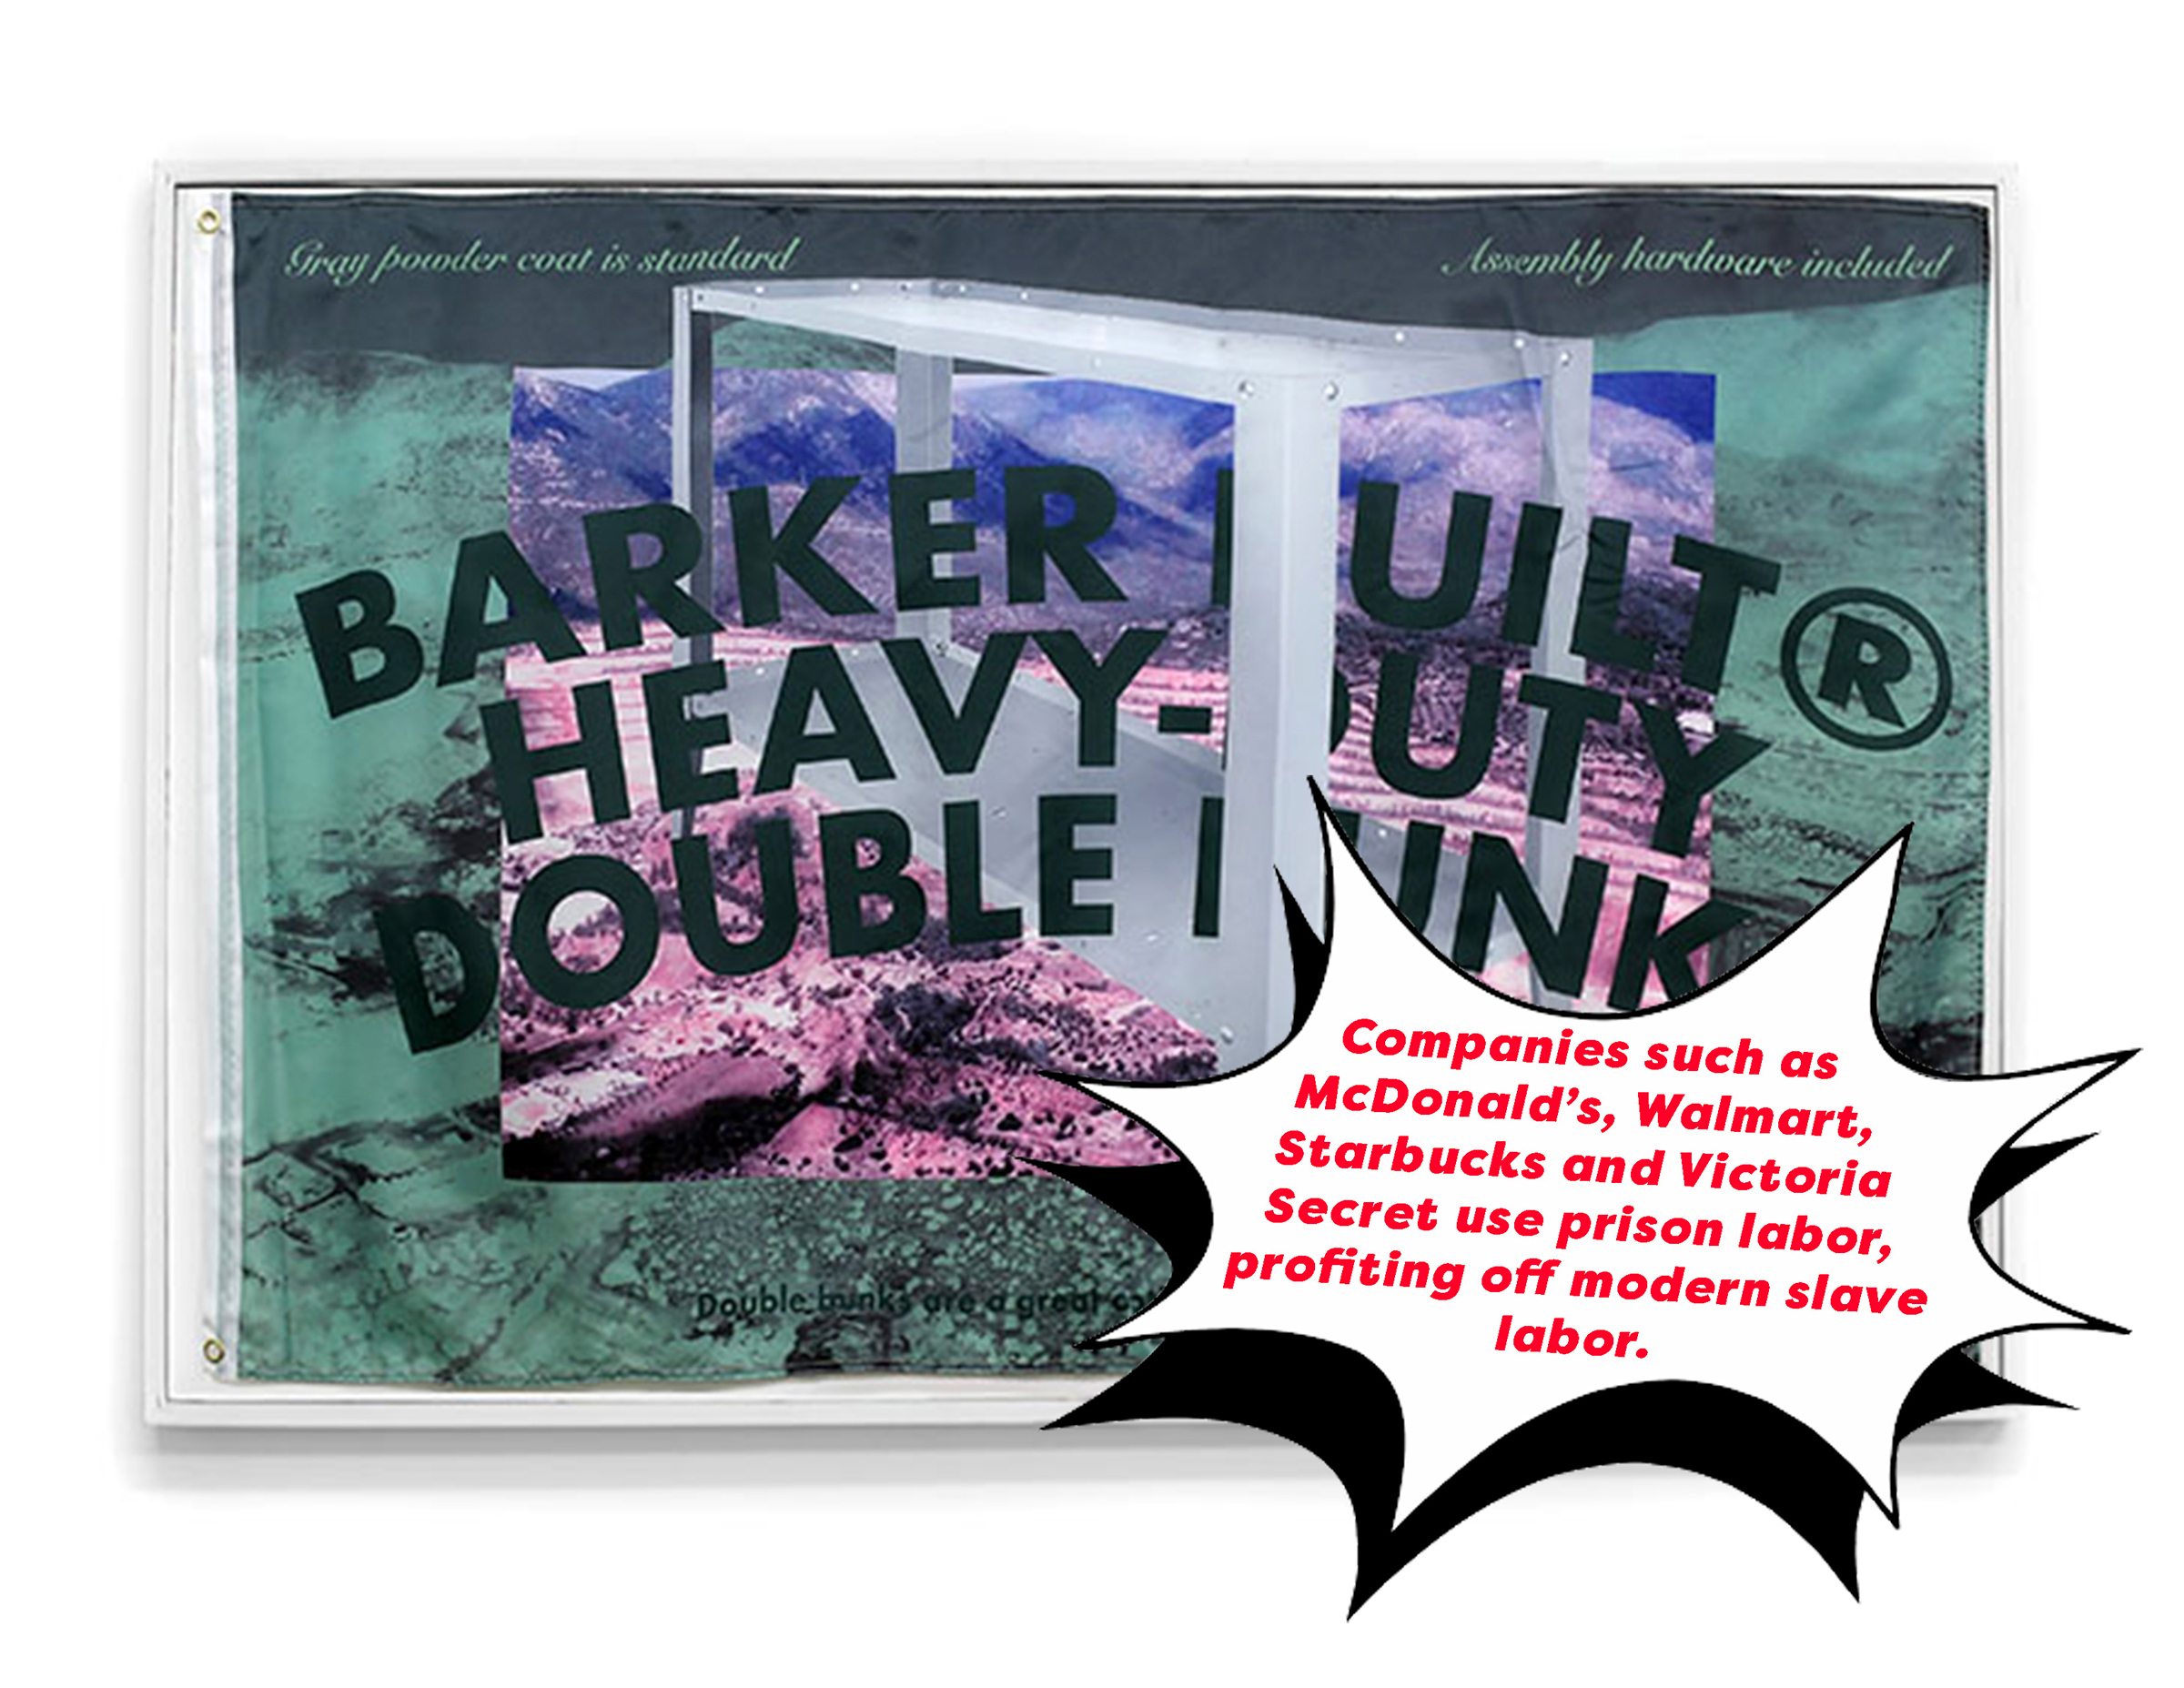 This image displays one flag mounted inside of a white frame. The imagery on the flag was created using a digital overlay process to layer images on top of one another. In the center of the composition, the text: 'Barker Built Heavy-Duty Double Bunk' is prominent and appears as a curved arch of letters printed over an image of a metal bunk bed. Behind that image is a photograph of a landscape with a mountain range. At the top of the flag there is smaller text that reads: 'gray powder coat is standard' and 'assembly hardware included.' Layered over this image of the framed flag is a digitally applied text bubble that displays the text: 'Companies such as Mcdonald's, Walmart, Starbucks and Victoria Secret use prison labor, profiting off modern slave labor.'